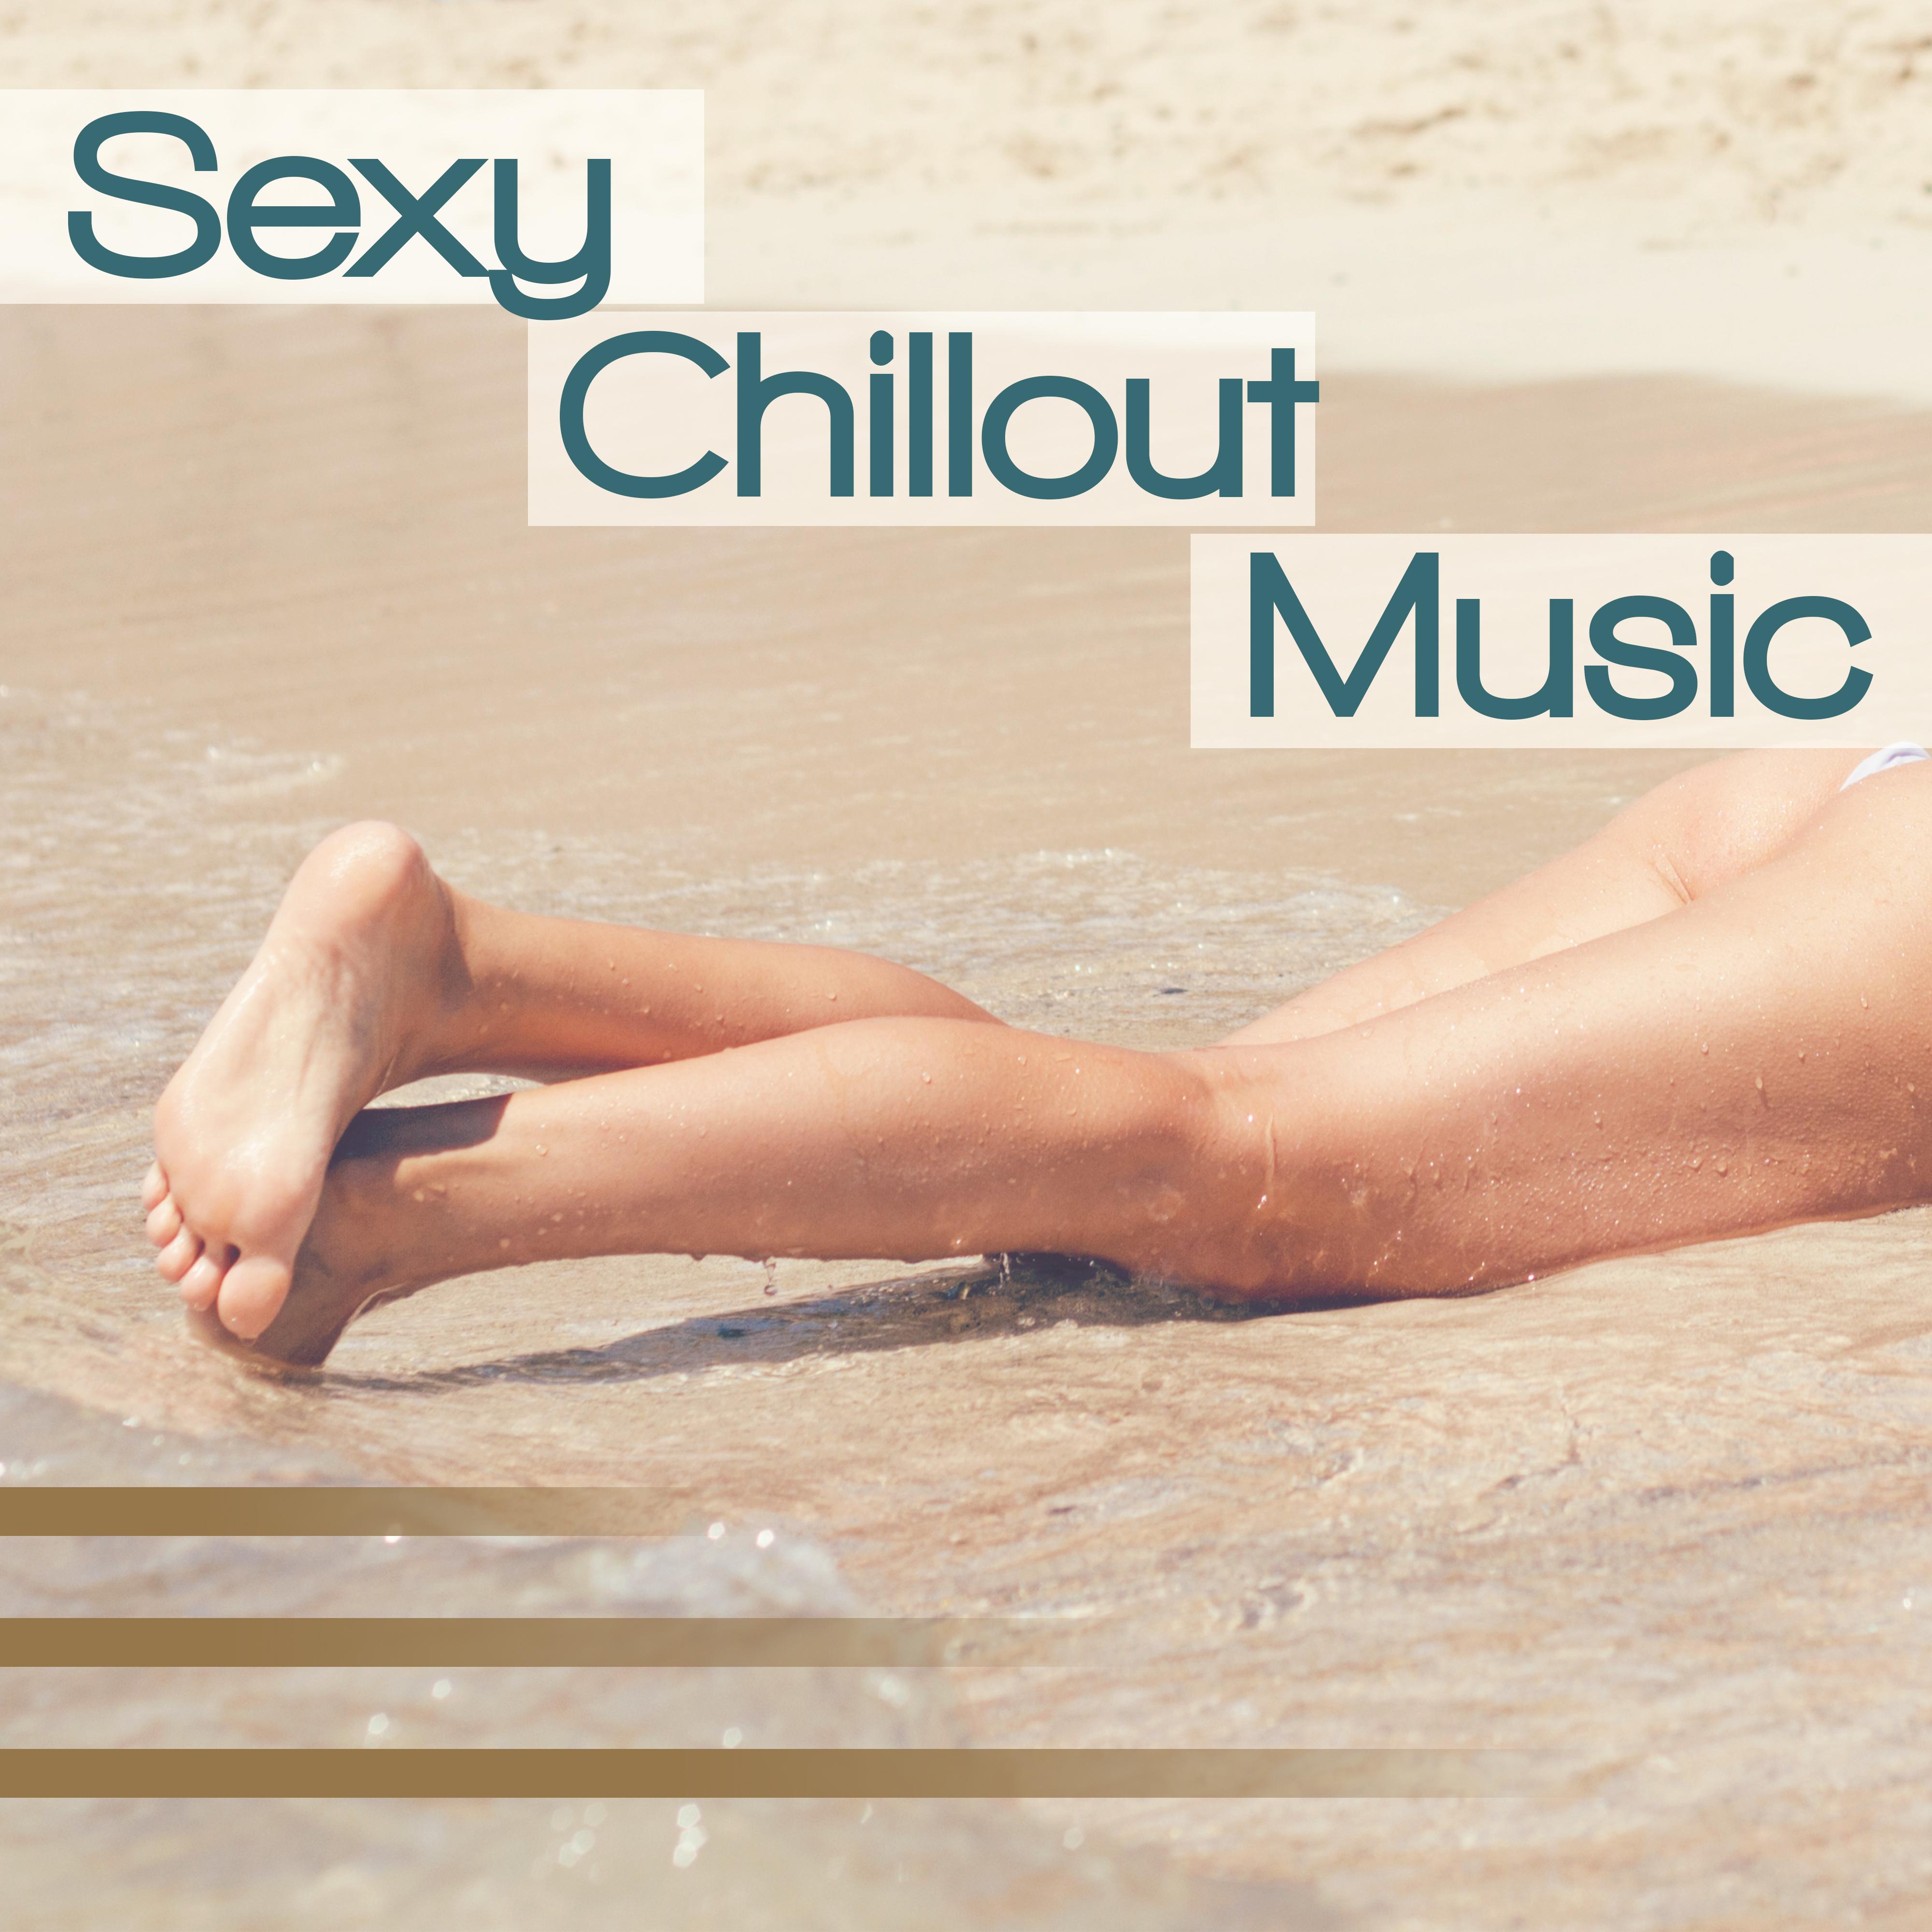 **** Chillout Music – Sensual Sounds, Hot Party, Deep Relaxation, Erotic Music, **** Beats, Ibiza Lounge